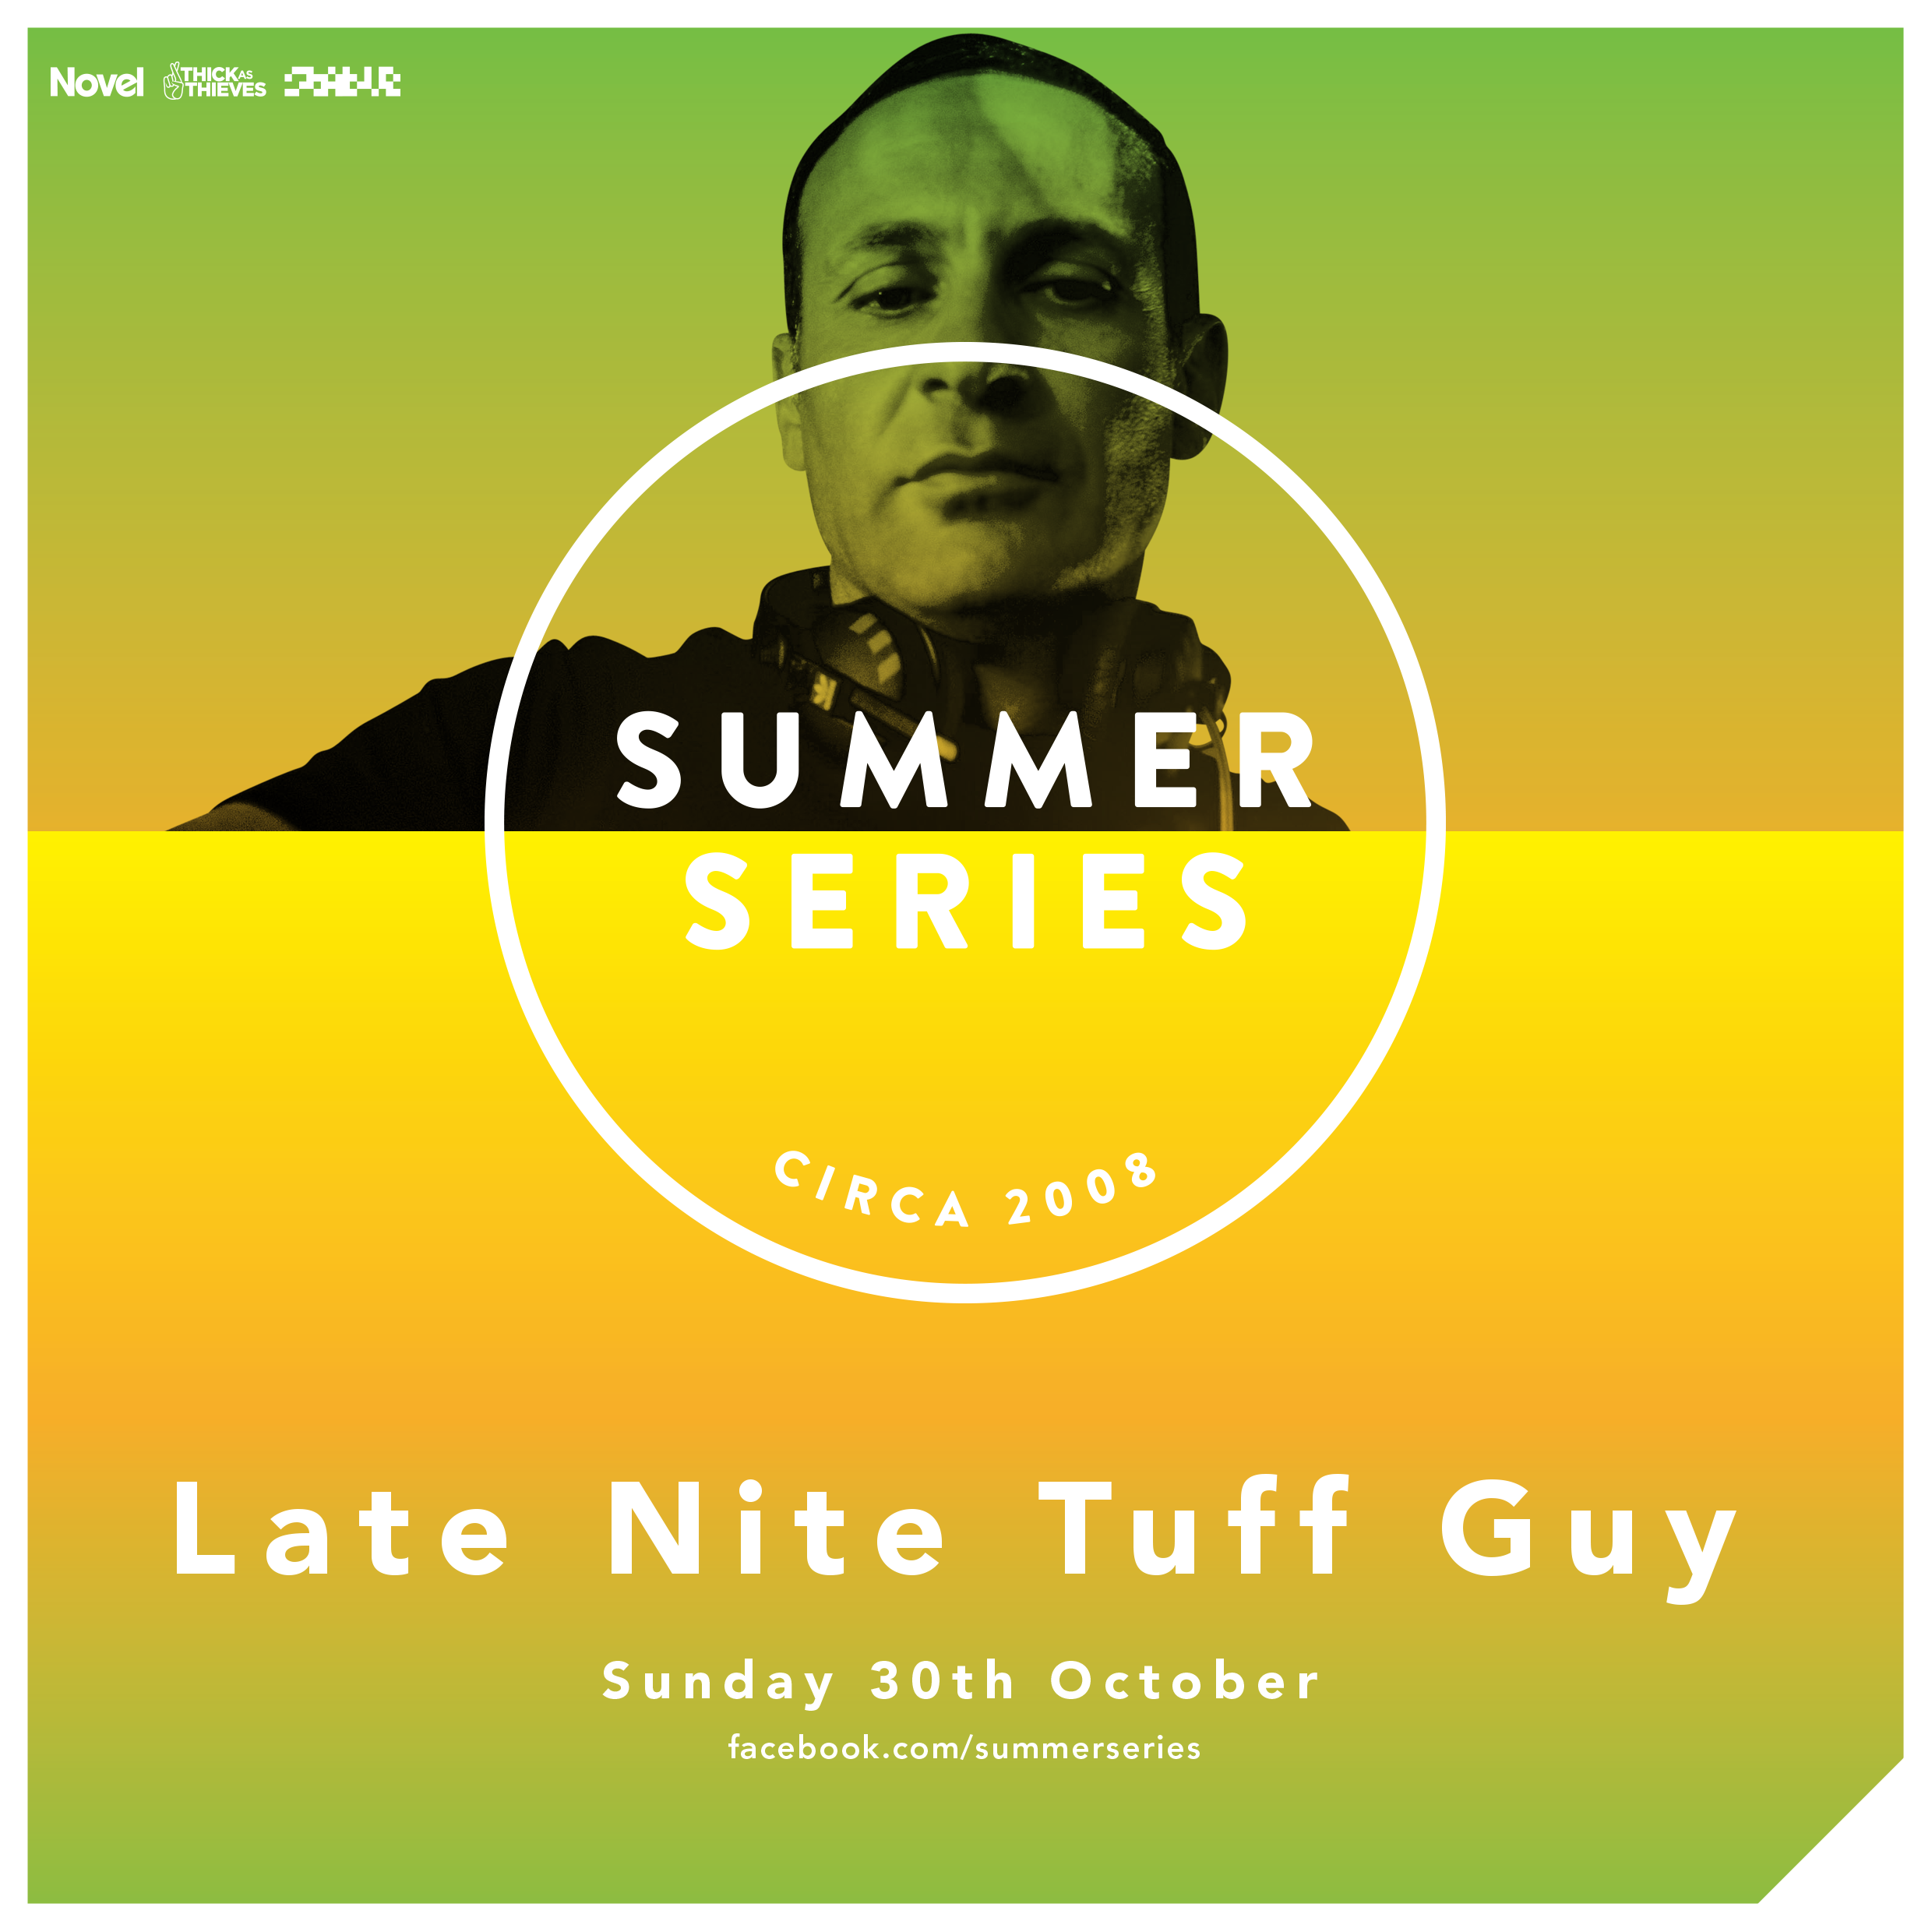 Summer Series with Late Nite Tuff Guy